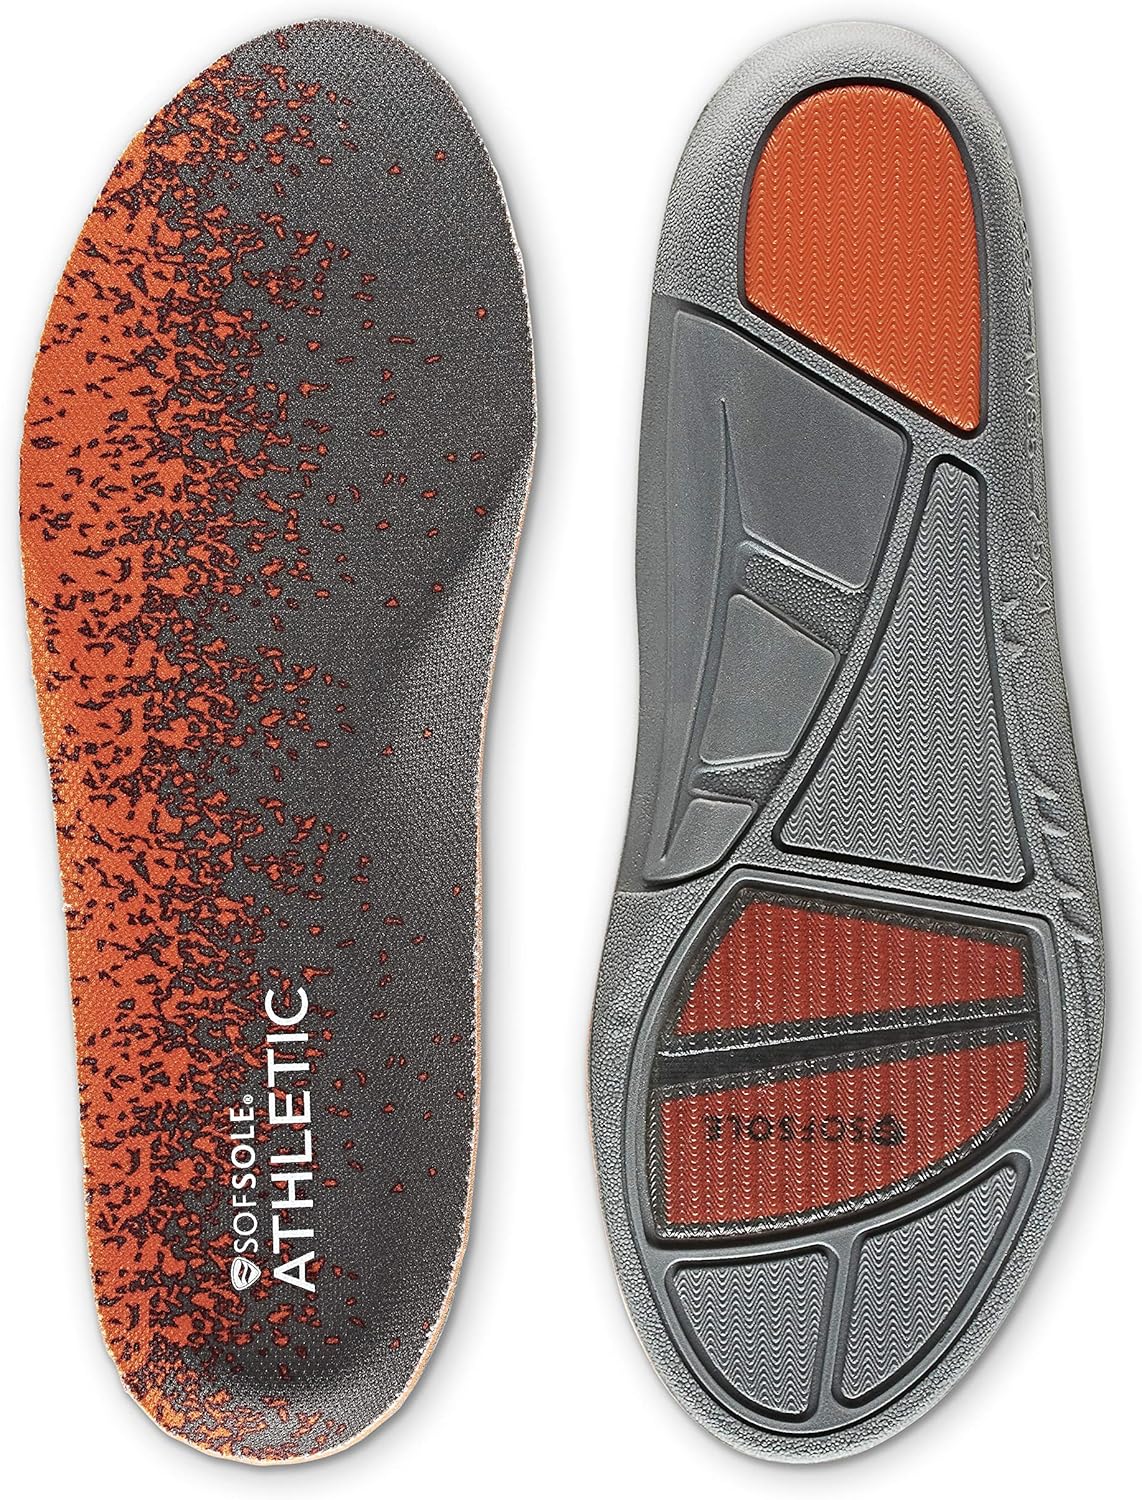 Sof Sole Men's Athletic Performance Full-Length Insole